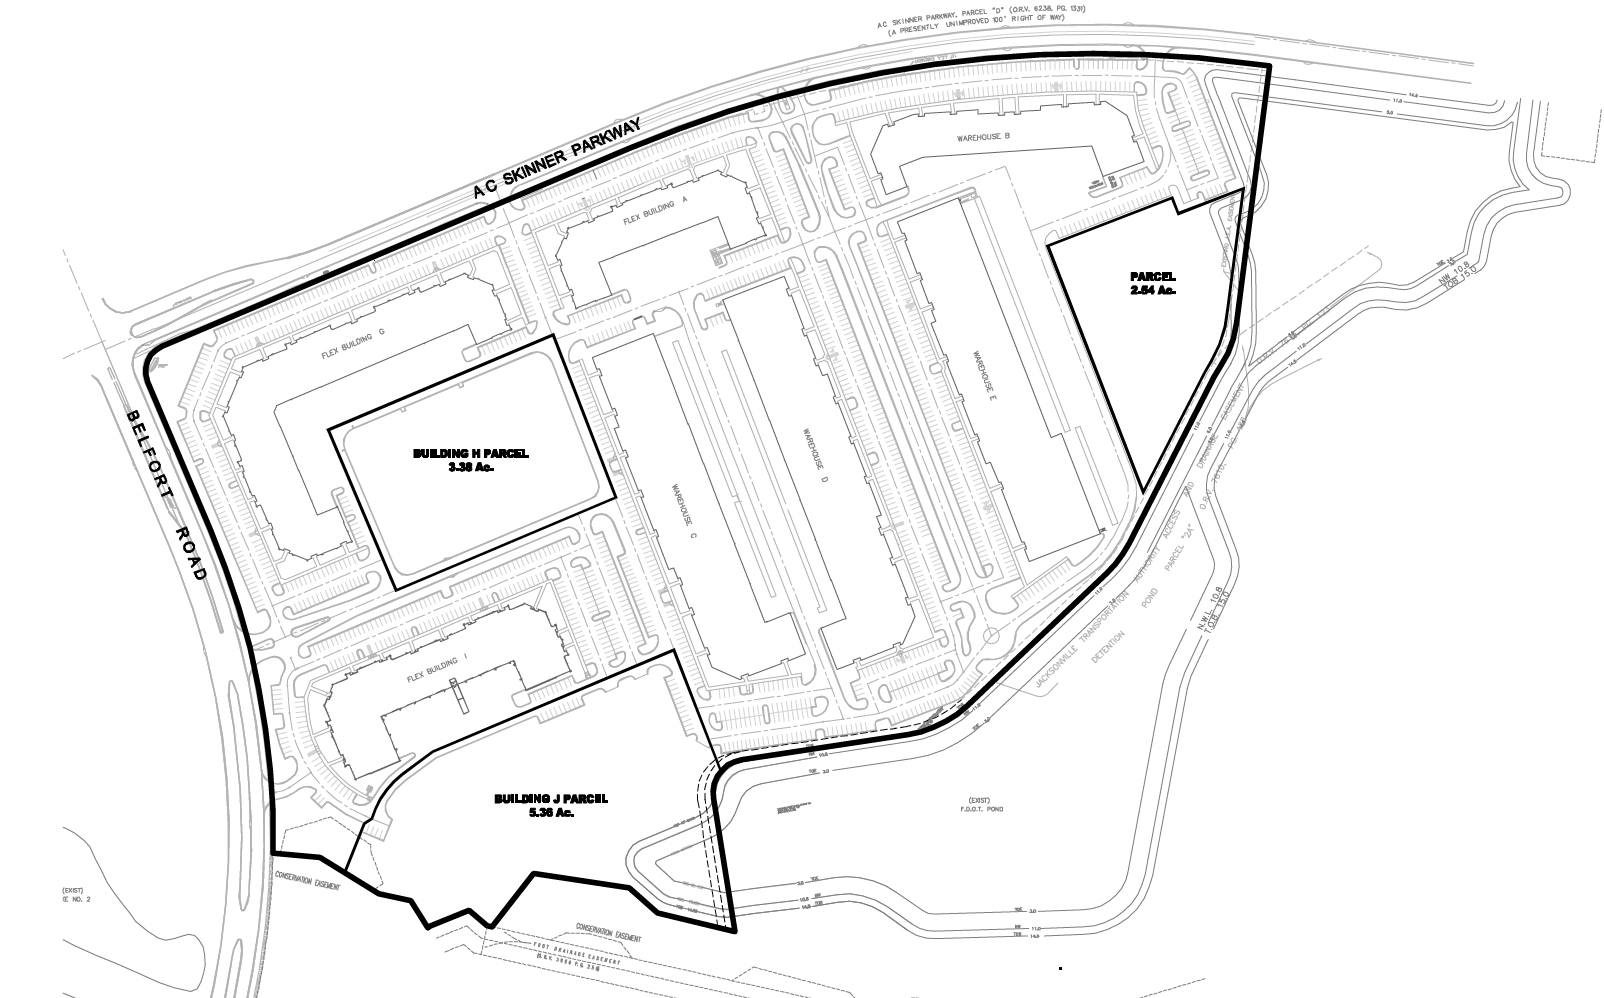 The site plan of the existing Liberty Business Park and the location of three new buildings that will complete the park.